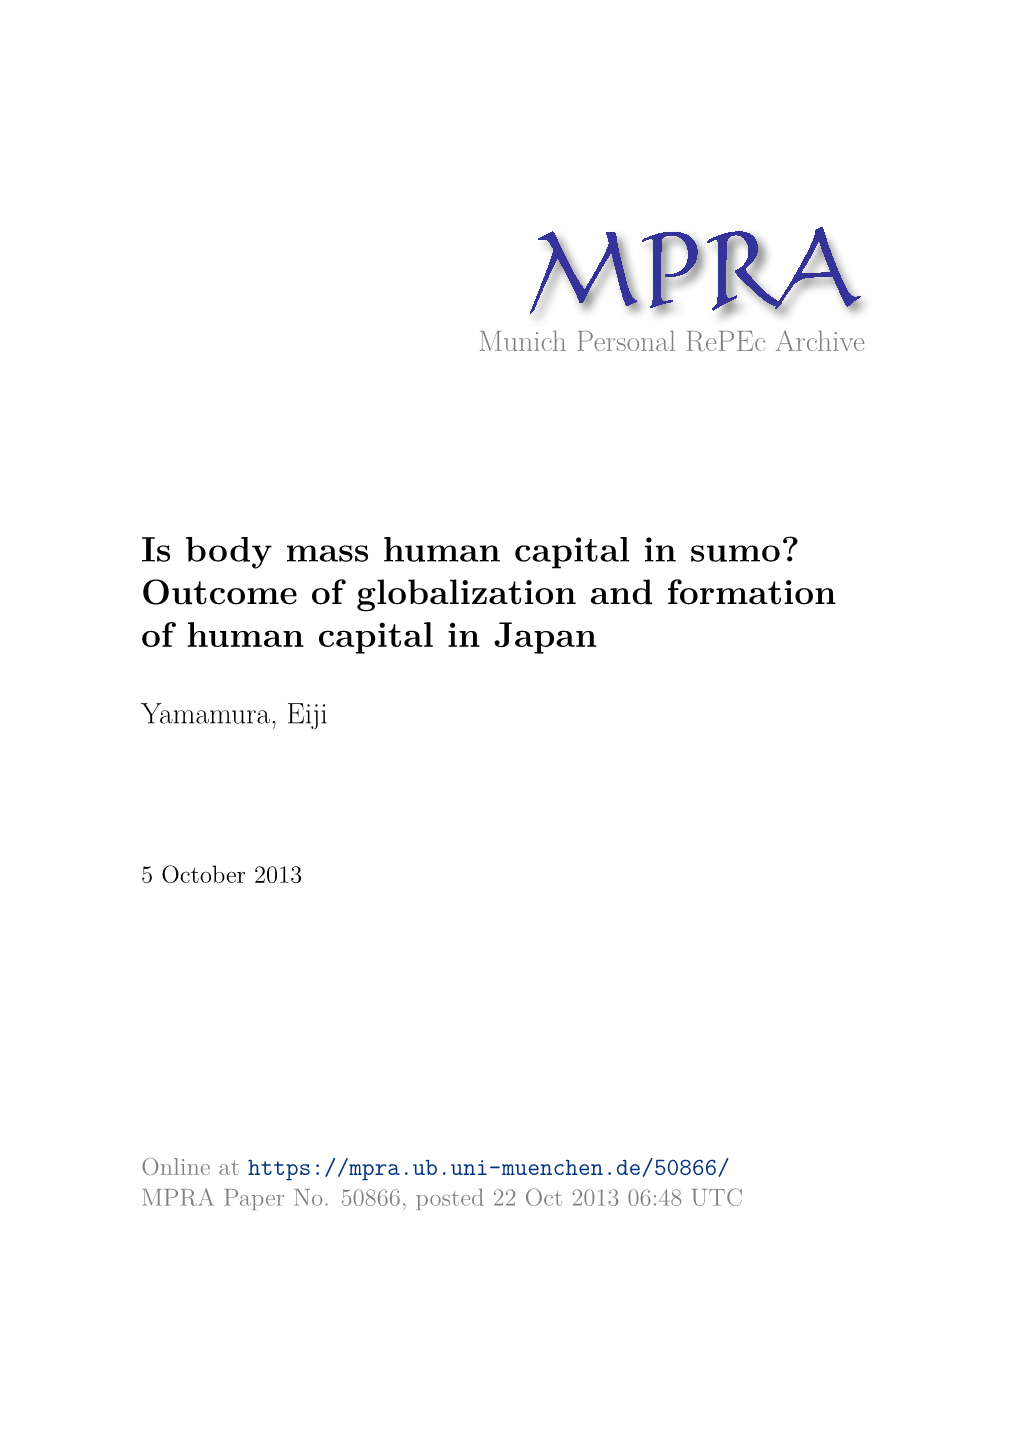 Is Body Mass Human Capital in Sumo? Outcome of Globalization and Formation of Human Capital in Japan